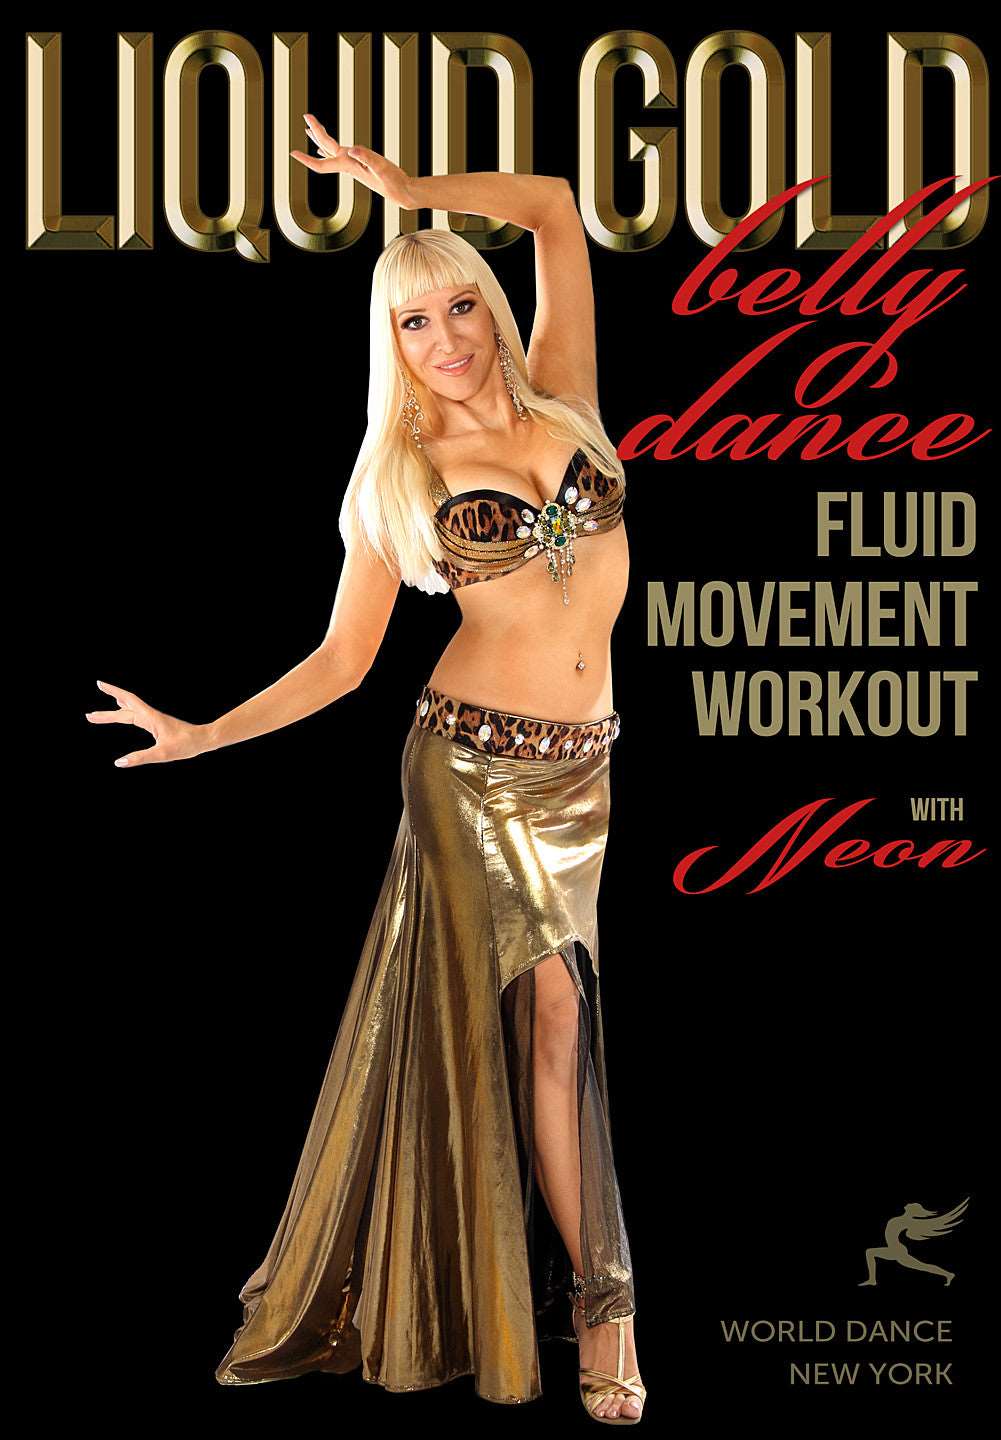 "Liquid Gold: Belly Dance Fluid Moves Workout" DVD with Neon - World Dance New York